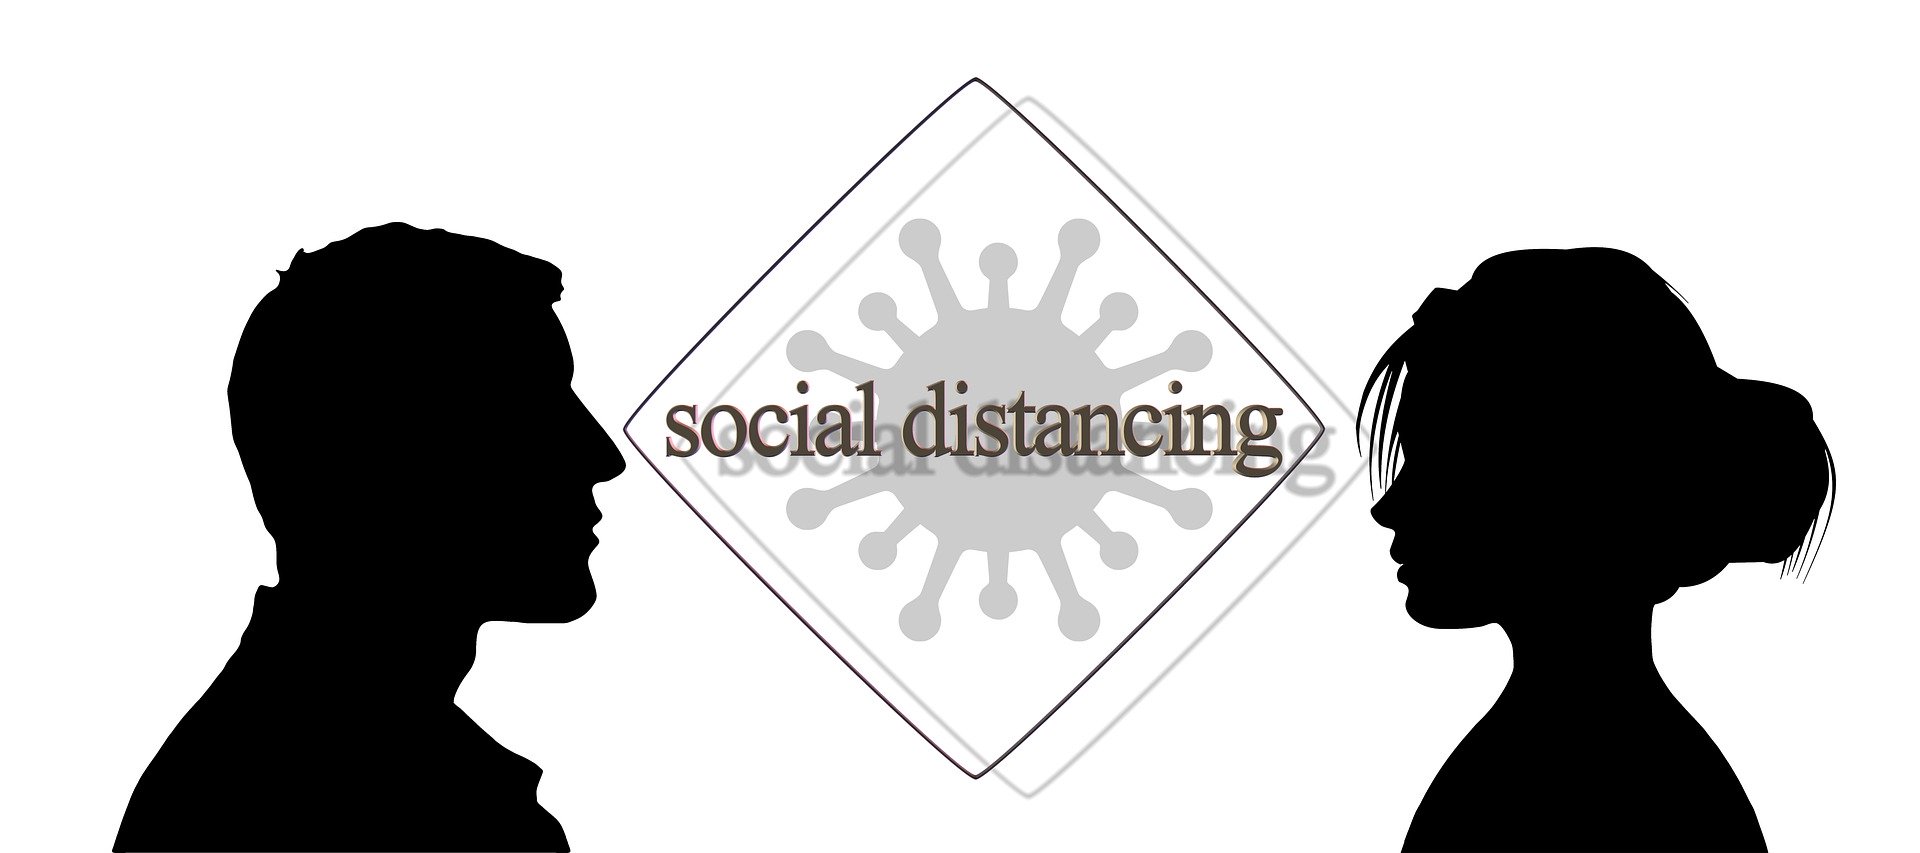 illustration of social distancing: shadows of man and woman keeping distance